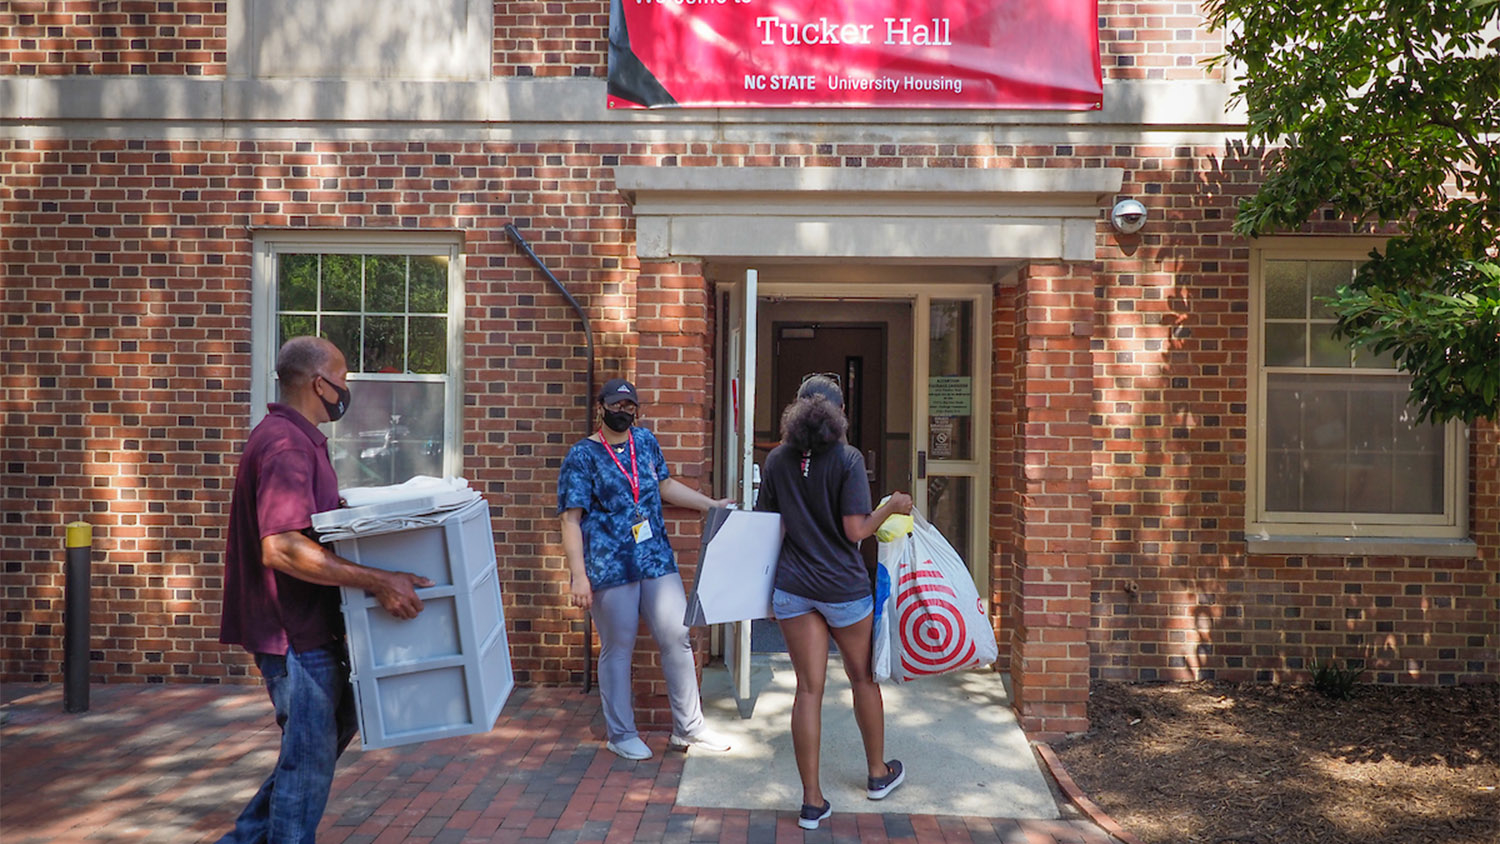 A student and parents carry their belongings into Tucker Hall